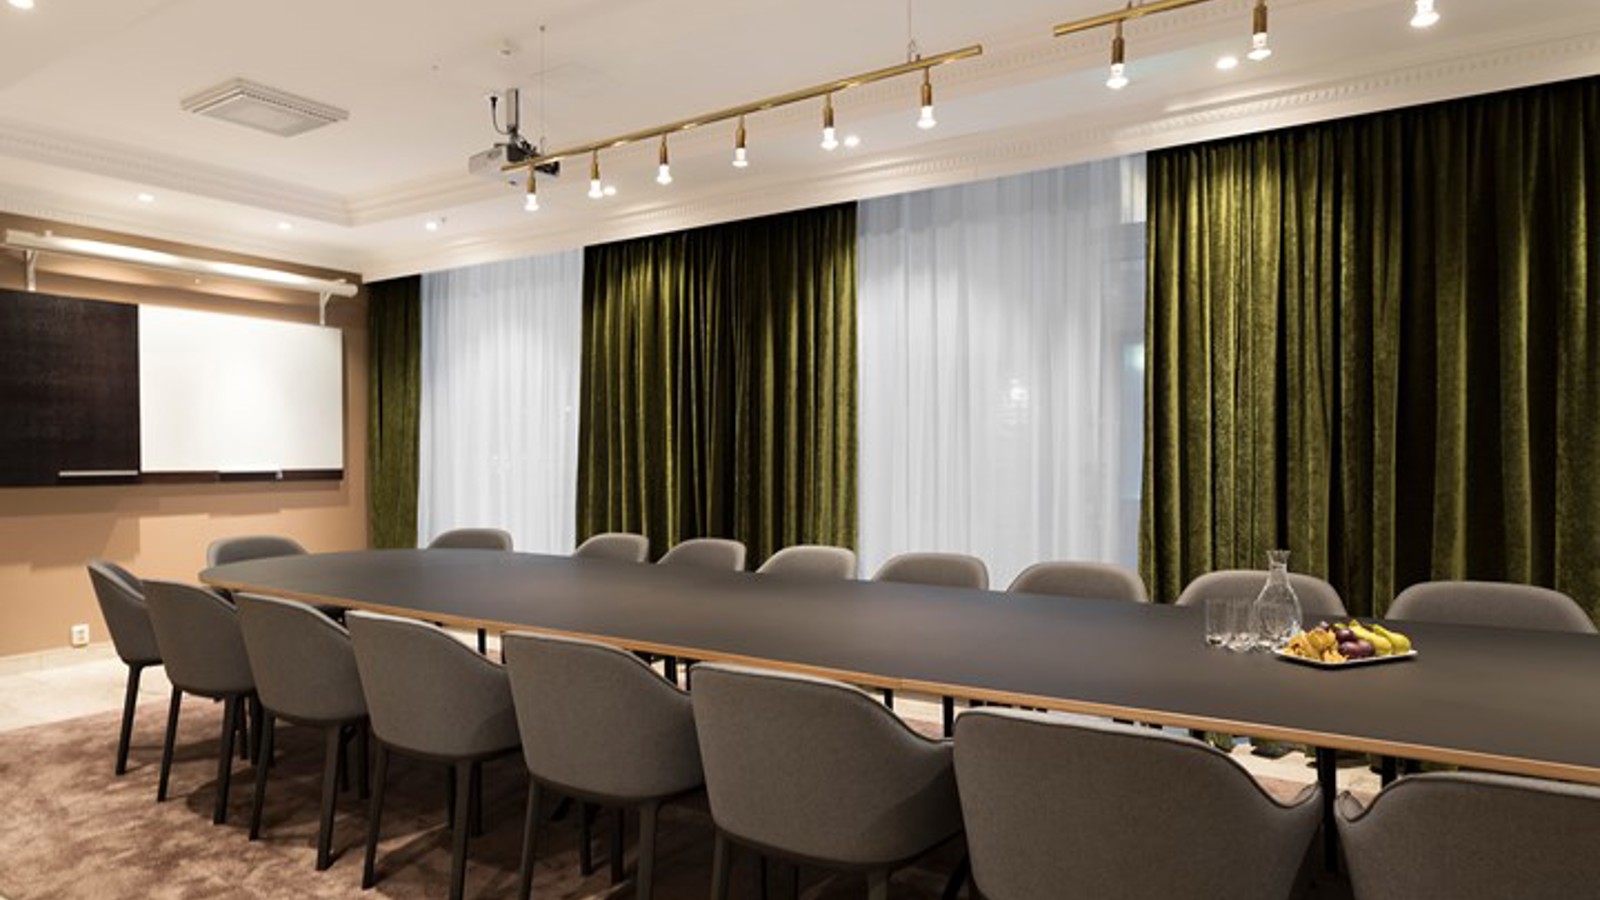 Board room with gray chairs and green curtains